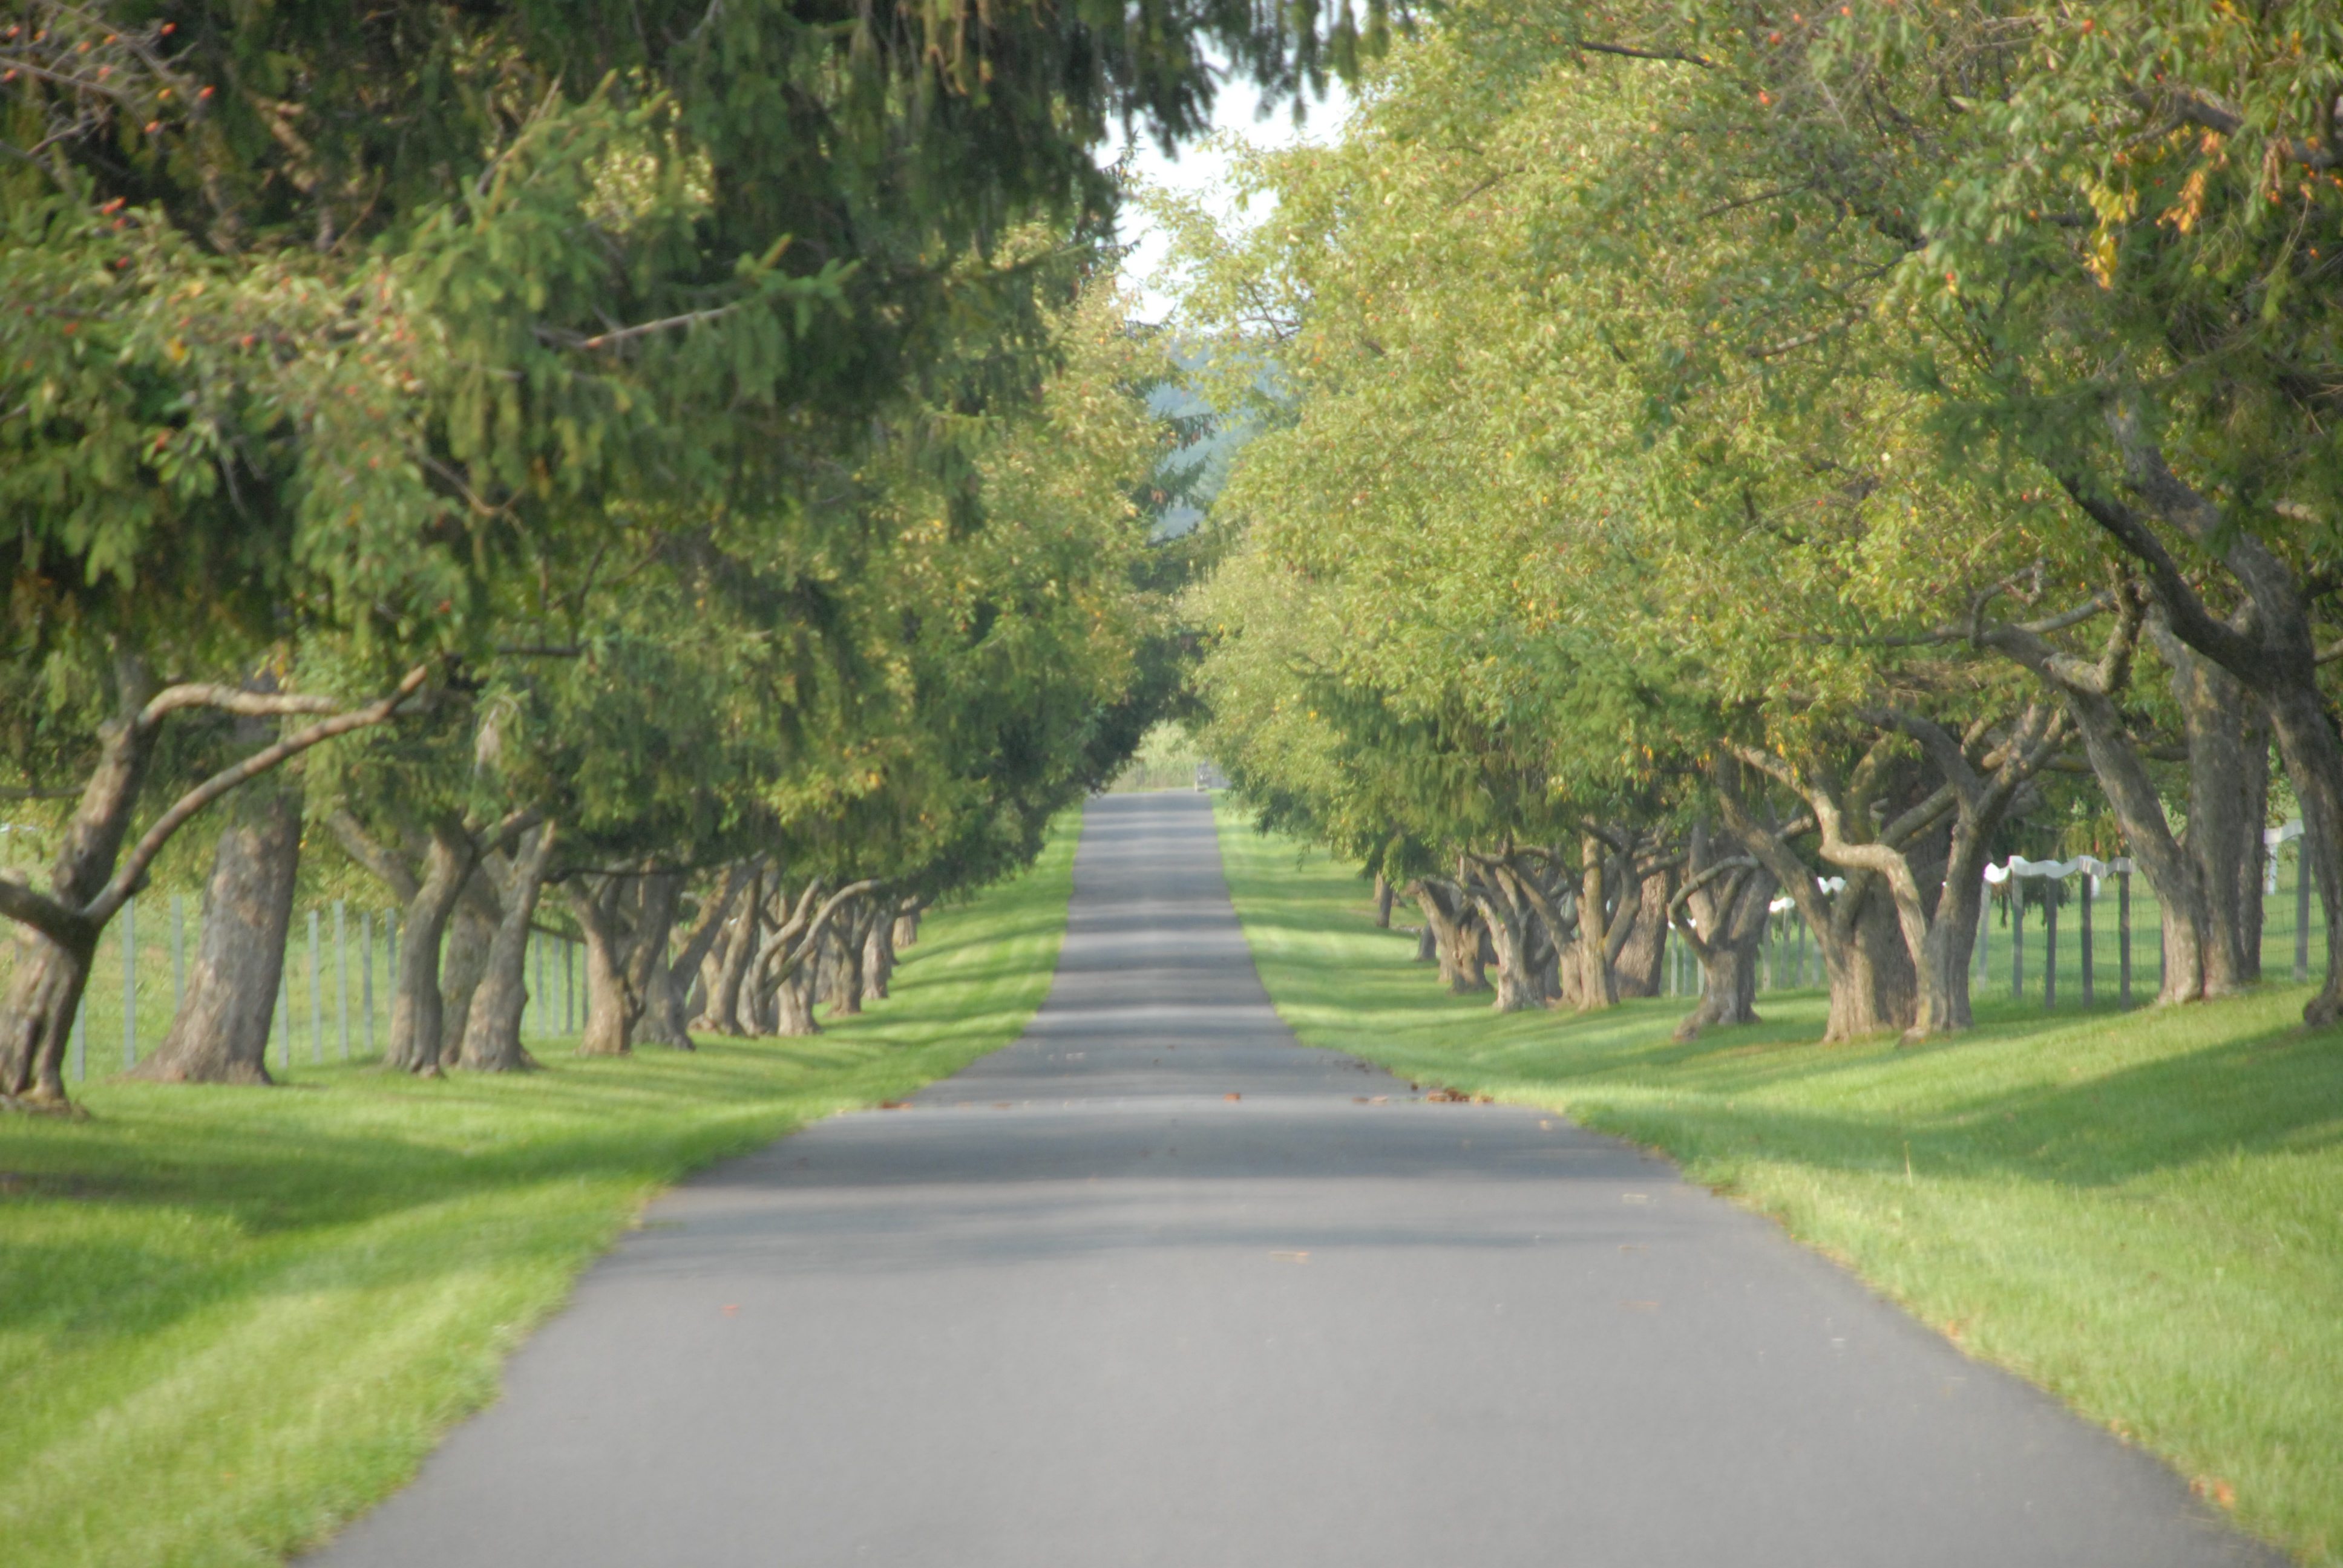 Driveway to President Eisenhower's Home & Cattle Ranch